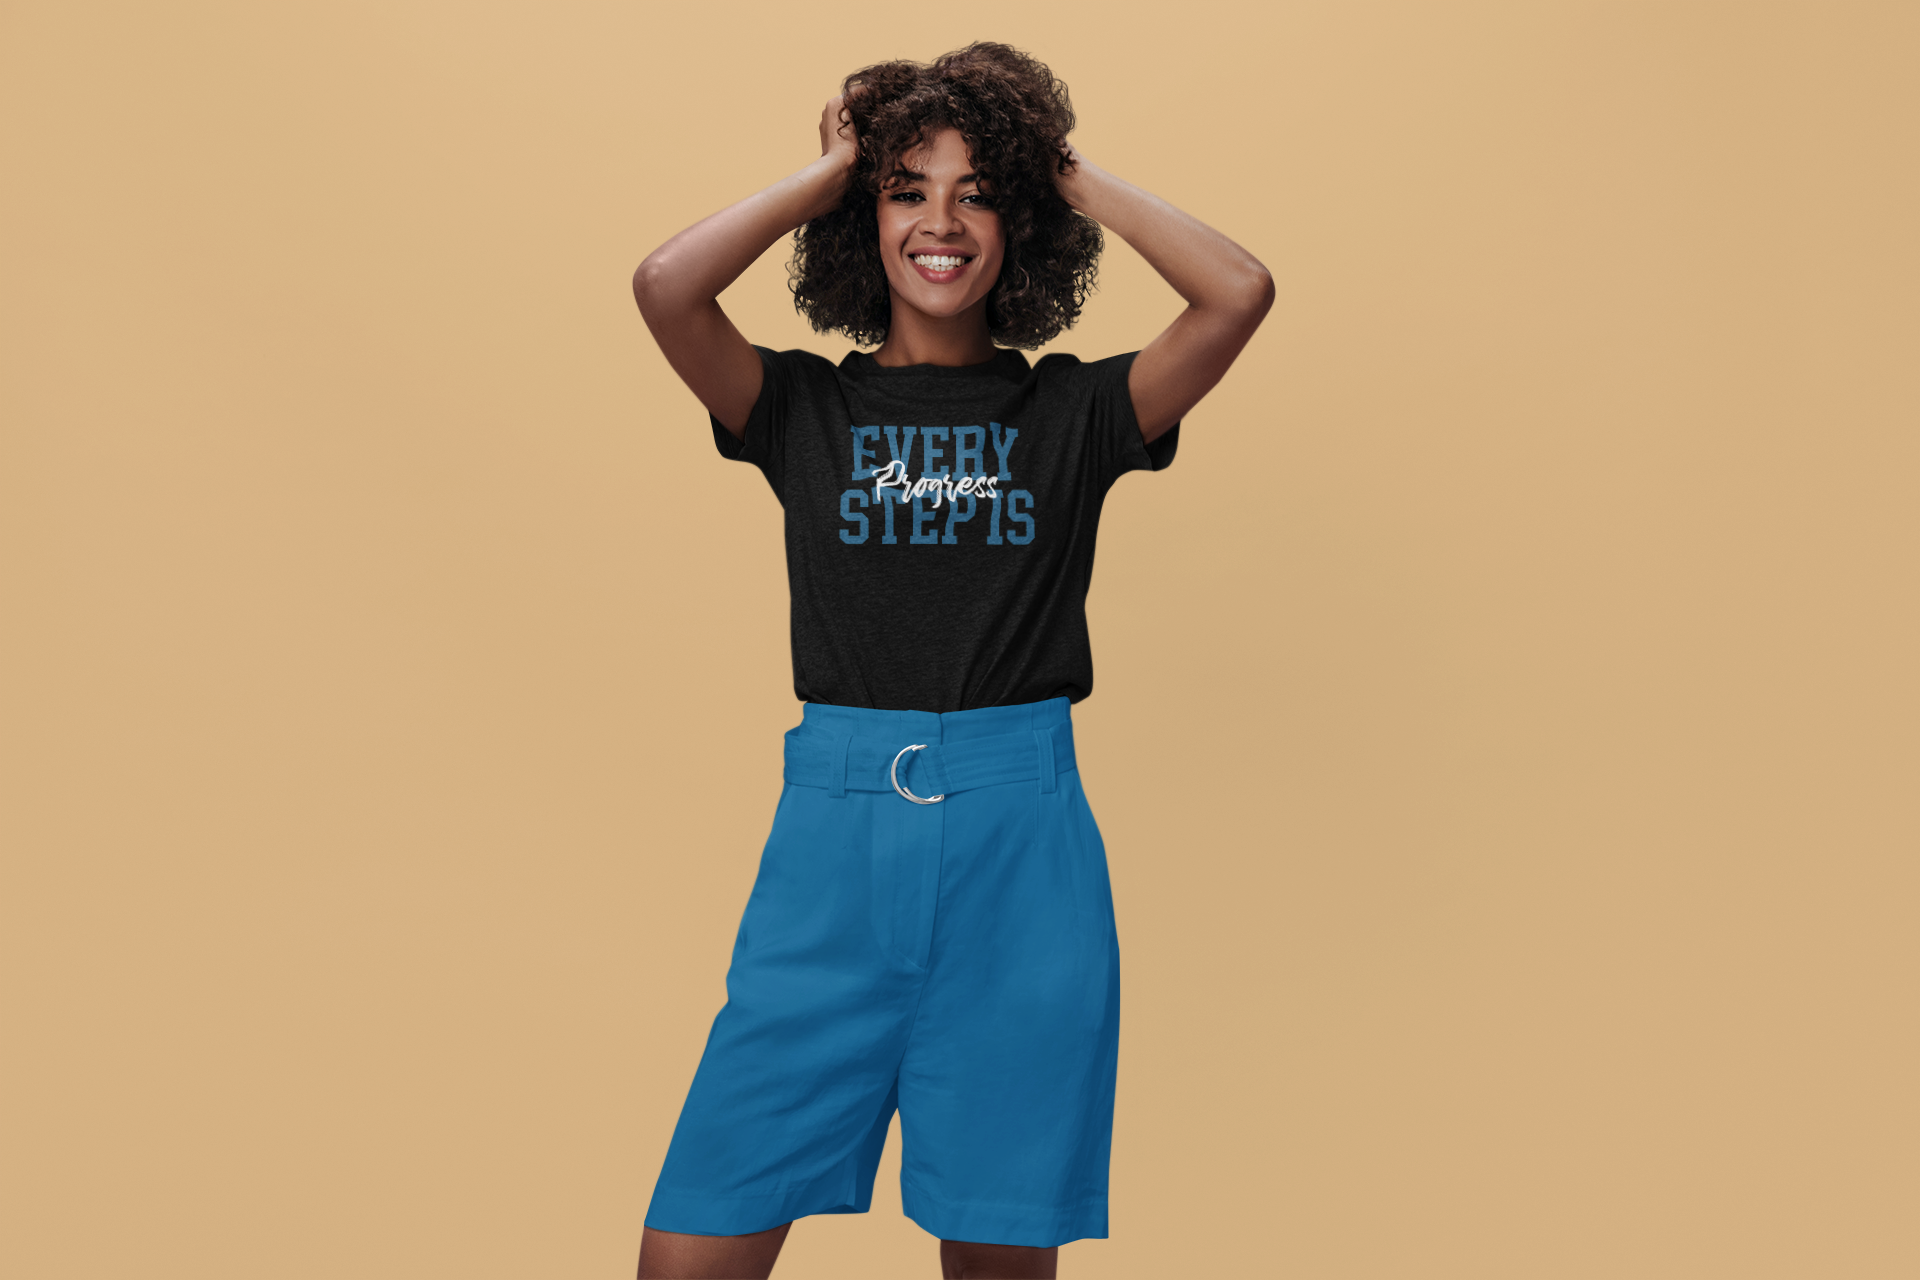 A woman wearing blue shorts and a black Every Step is Progress Tee by Sharp Tact Kreativ | Tees & Gifts with Encouraging Messages to Brighten Your Day with a Bit of Wit.